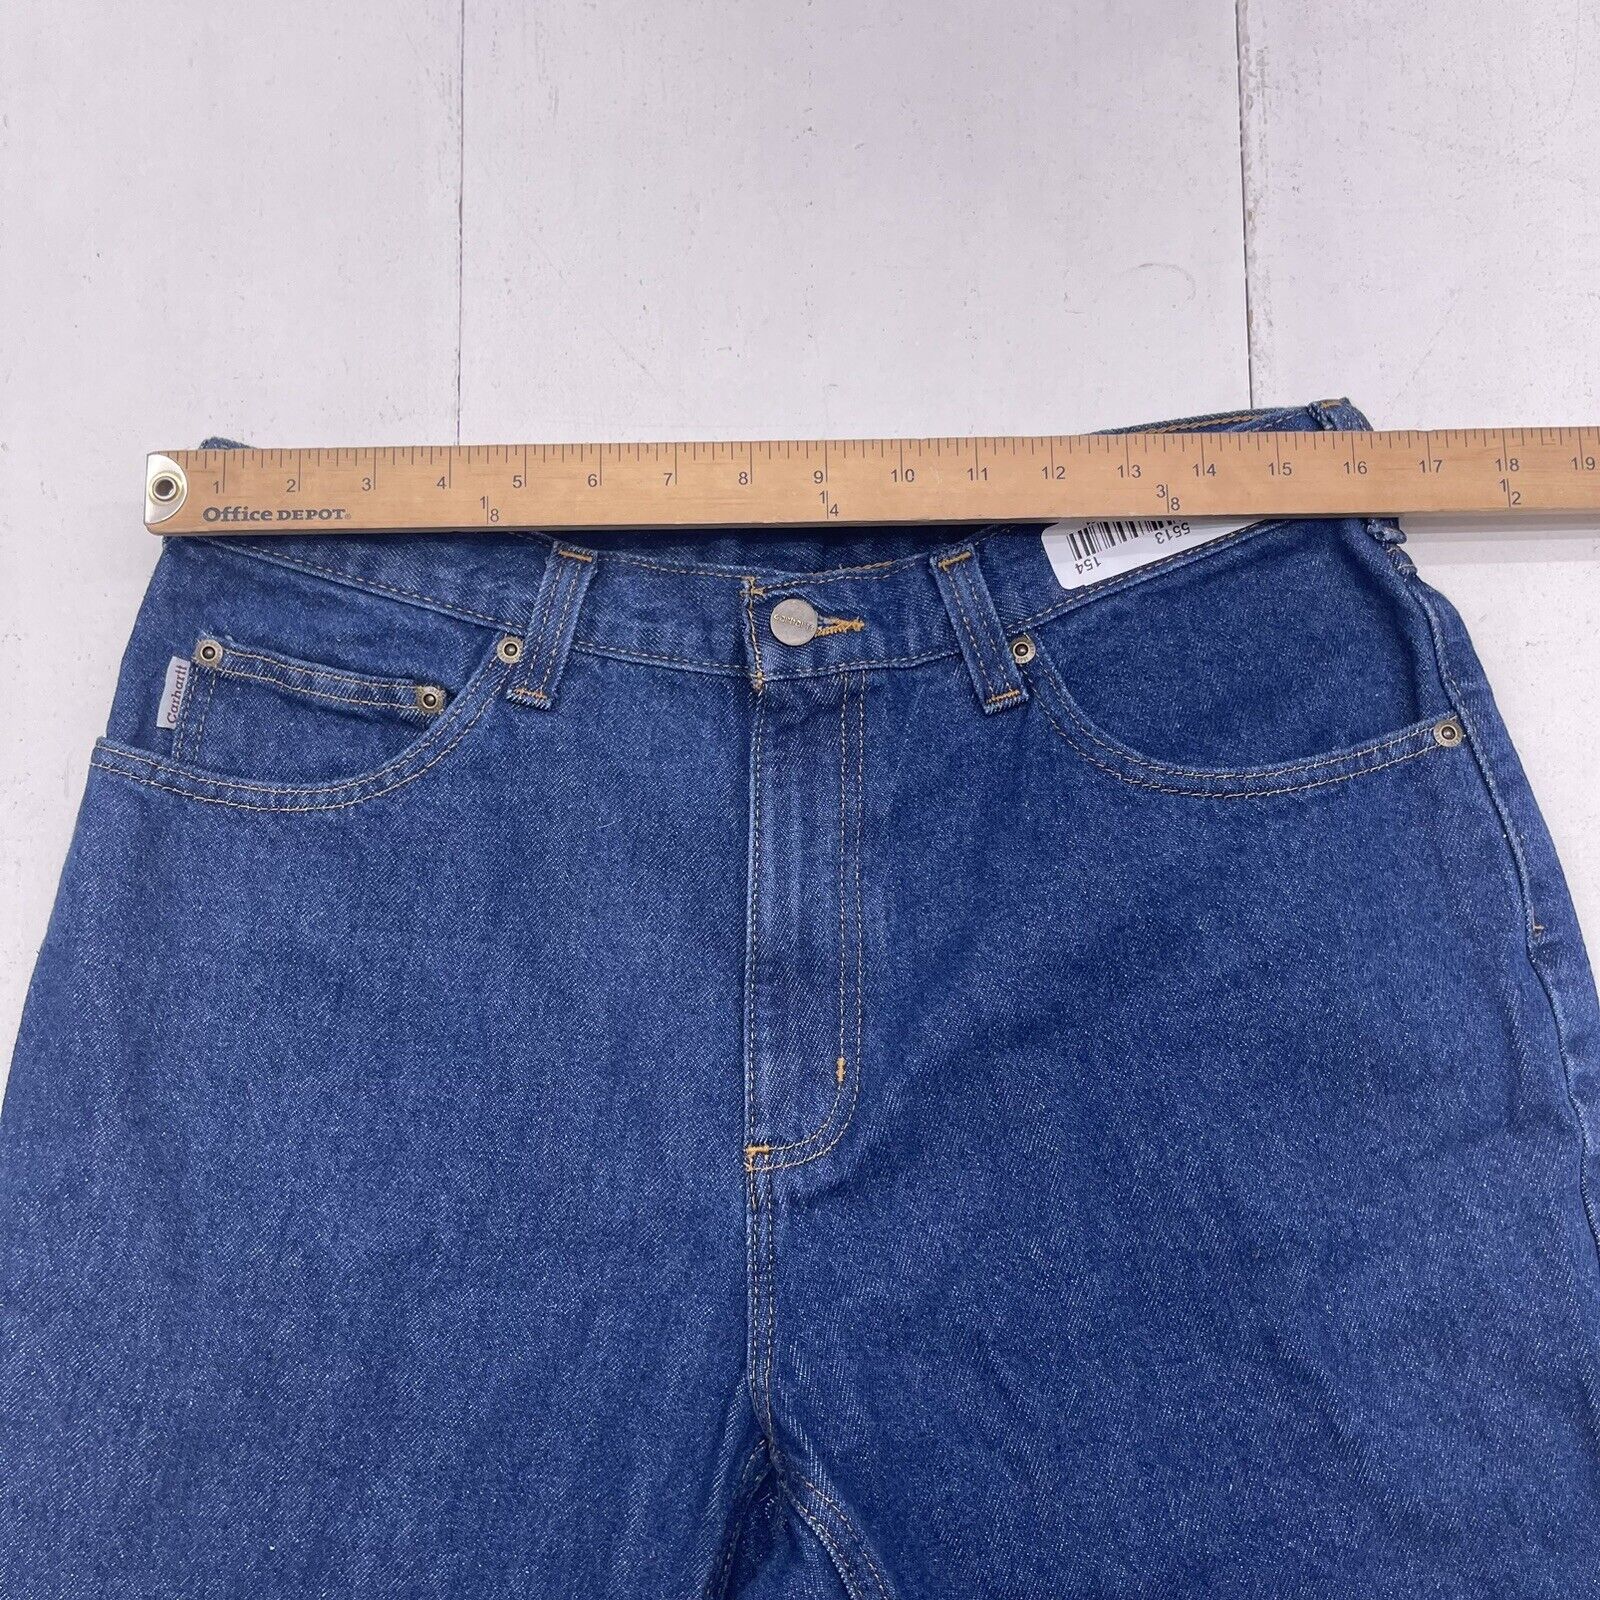 Carhartt 381-83 Relaxed Fit Blue Denim Works Jeans Mens Size 33/30 New ...